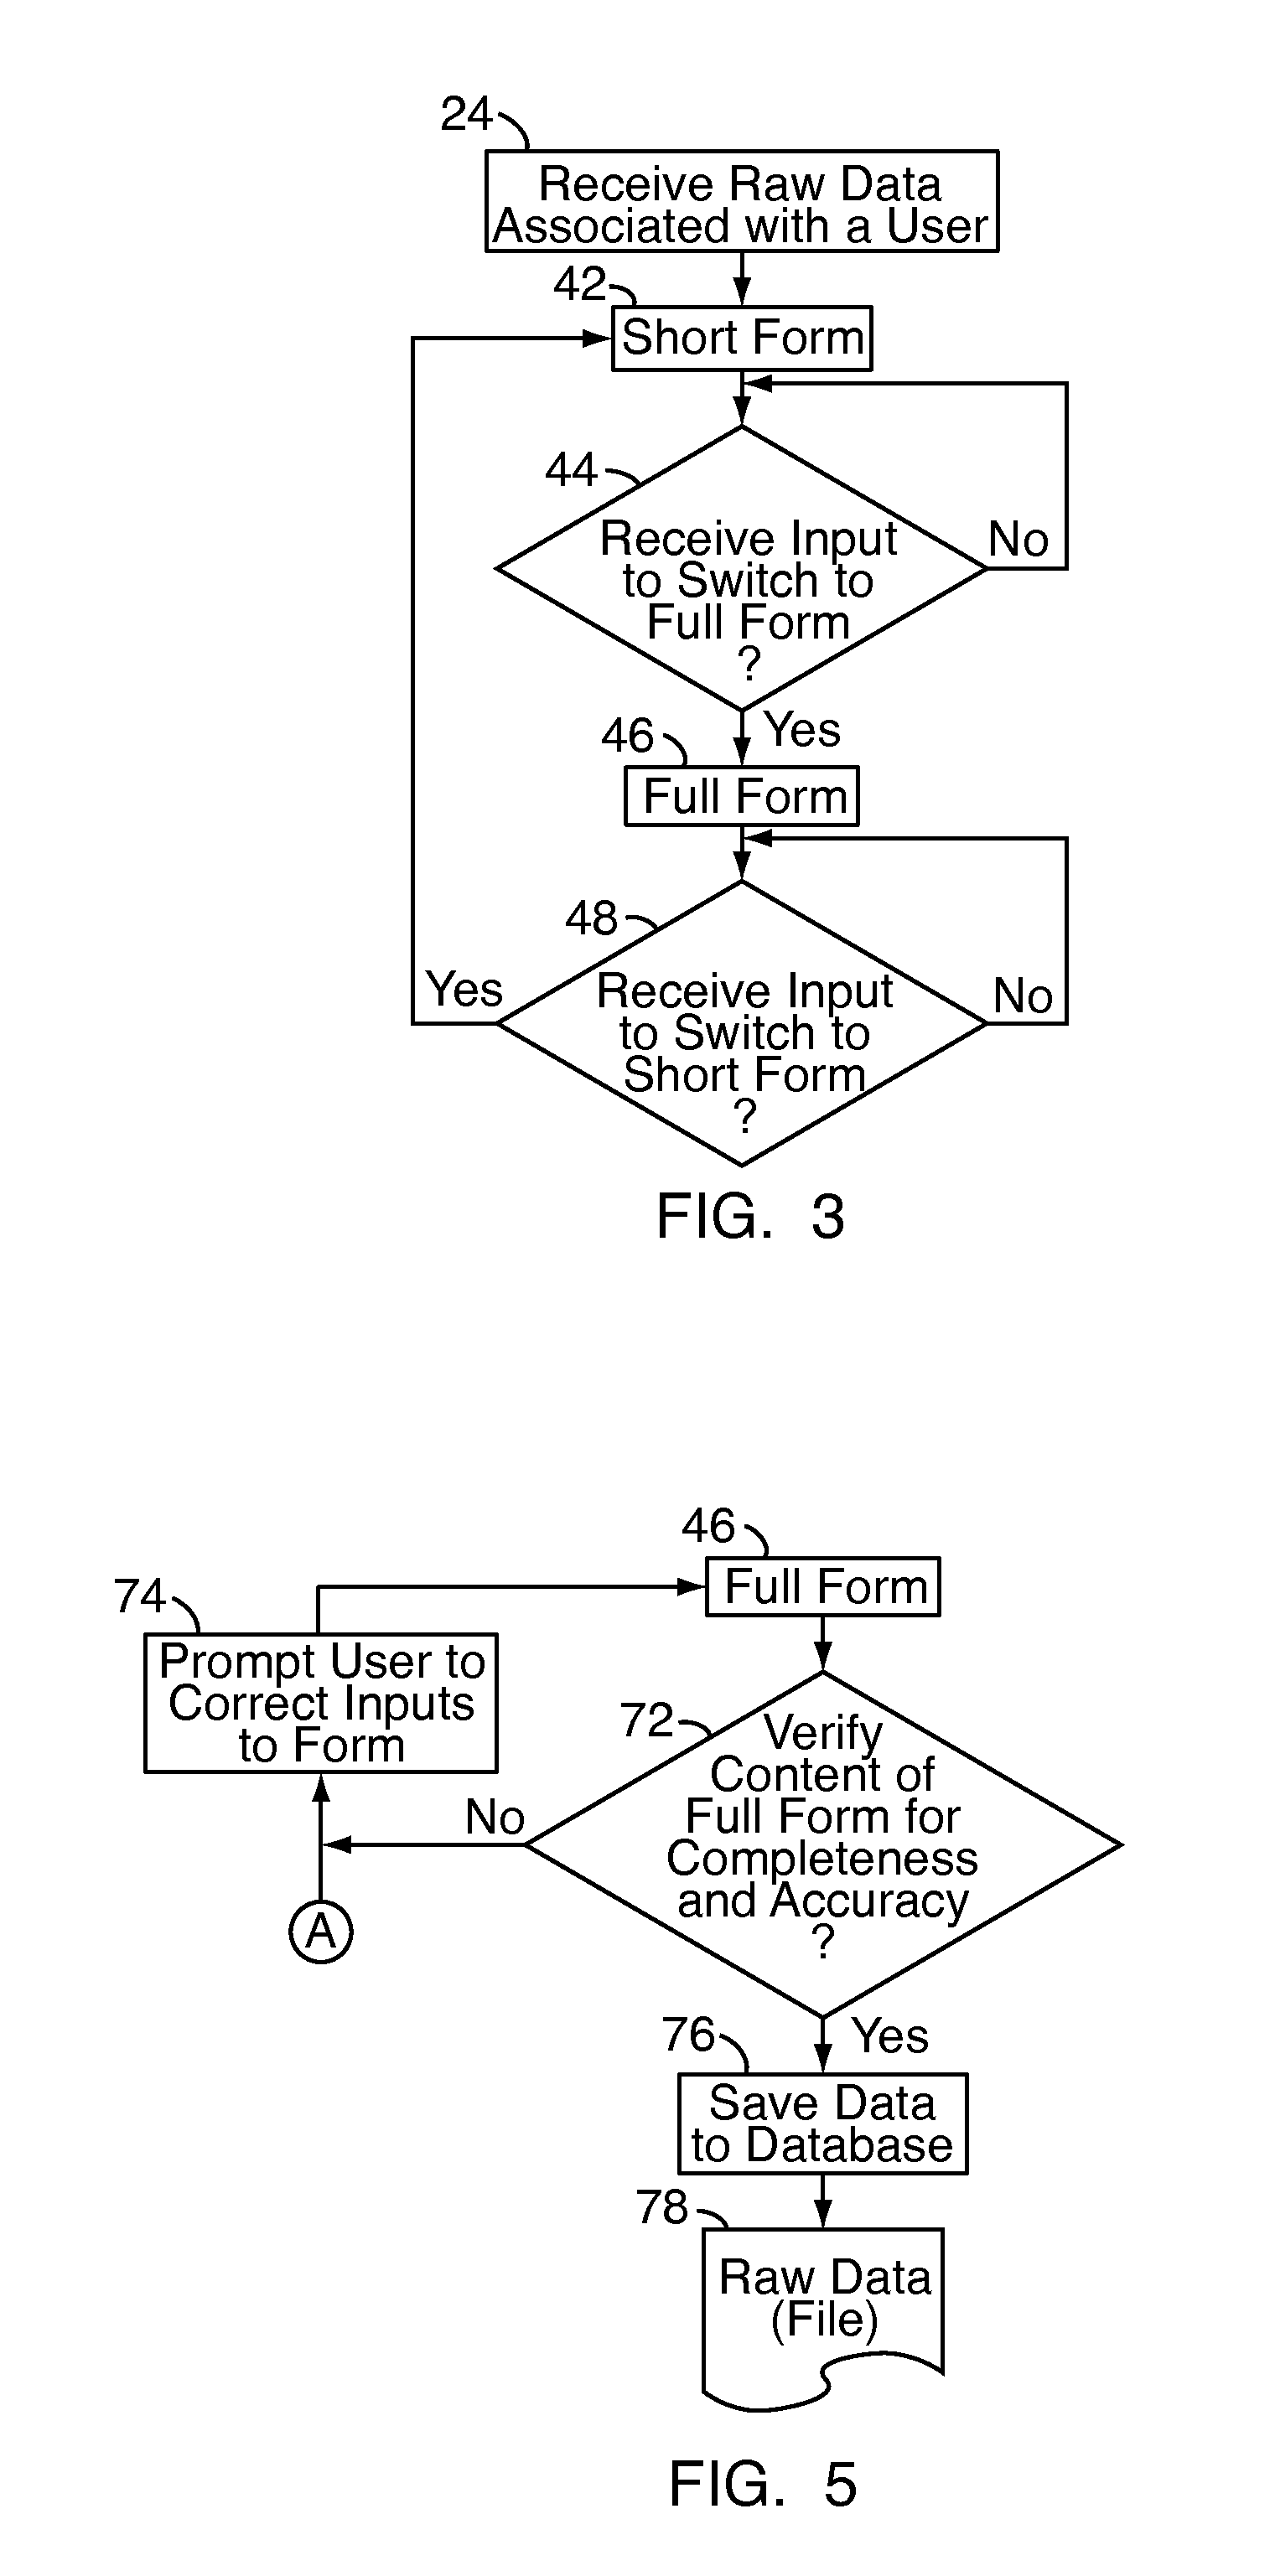 Method for decision making using artificial intelligence